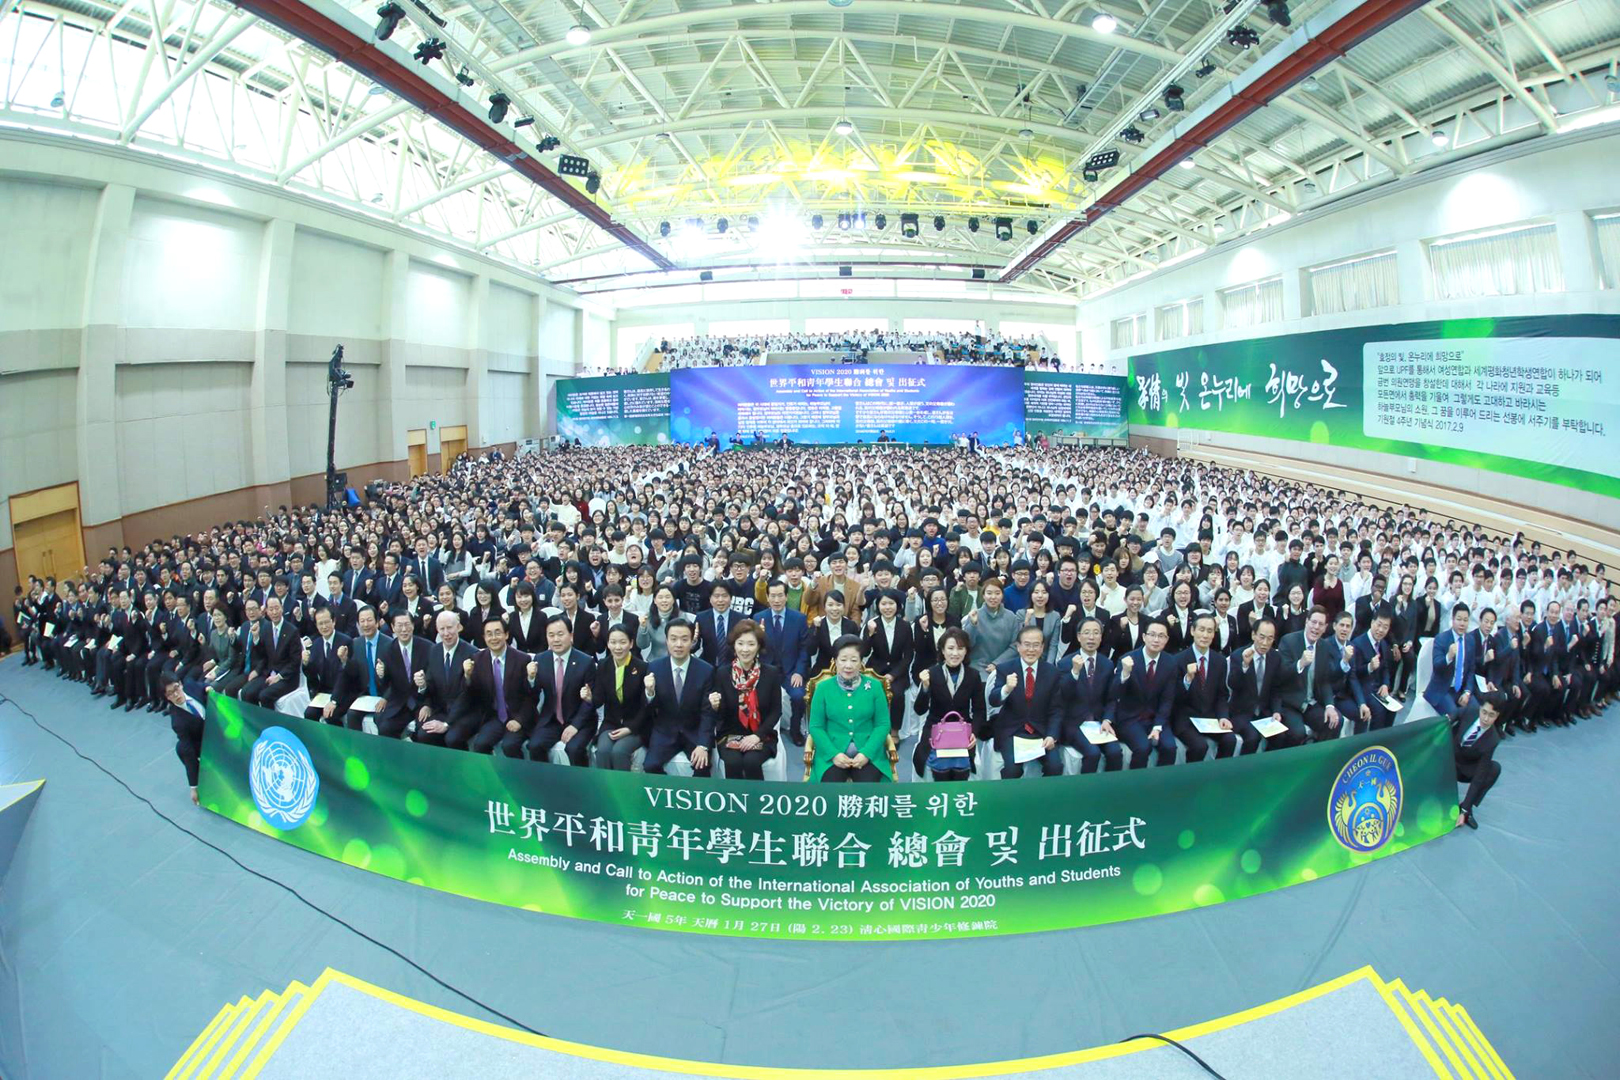 Assembly and Call to Action of the International Association of Youths and Students for Peace to Support the Victory of Vision 2020 (February 23, Cheongshim International Youth Training Center)